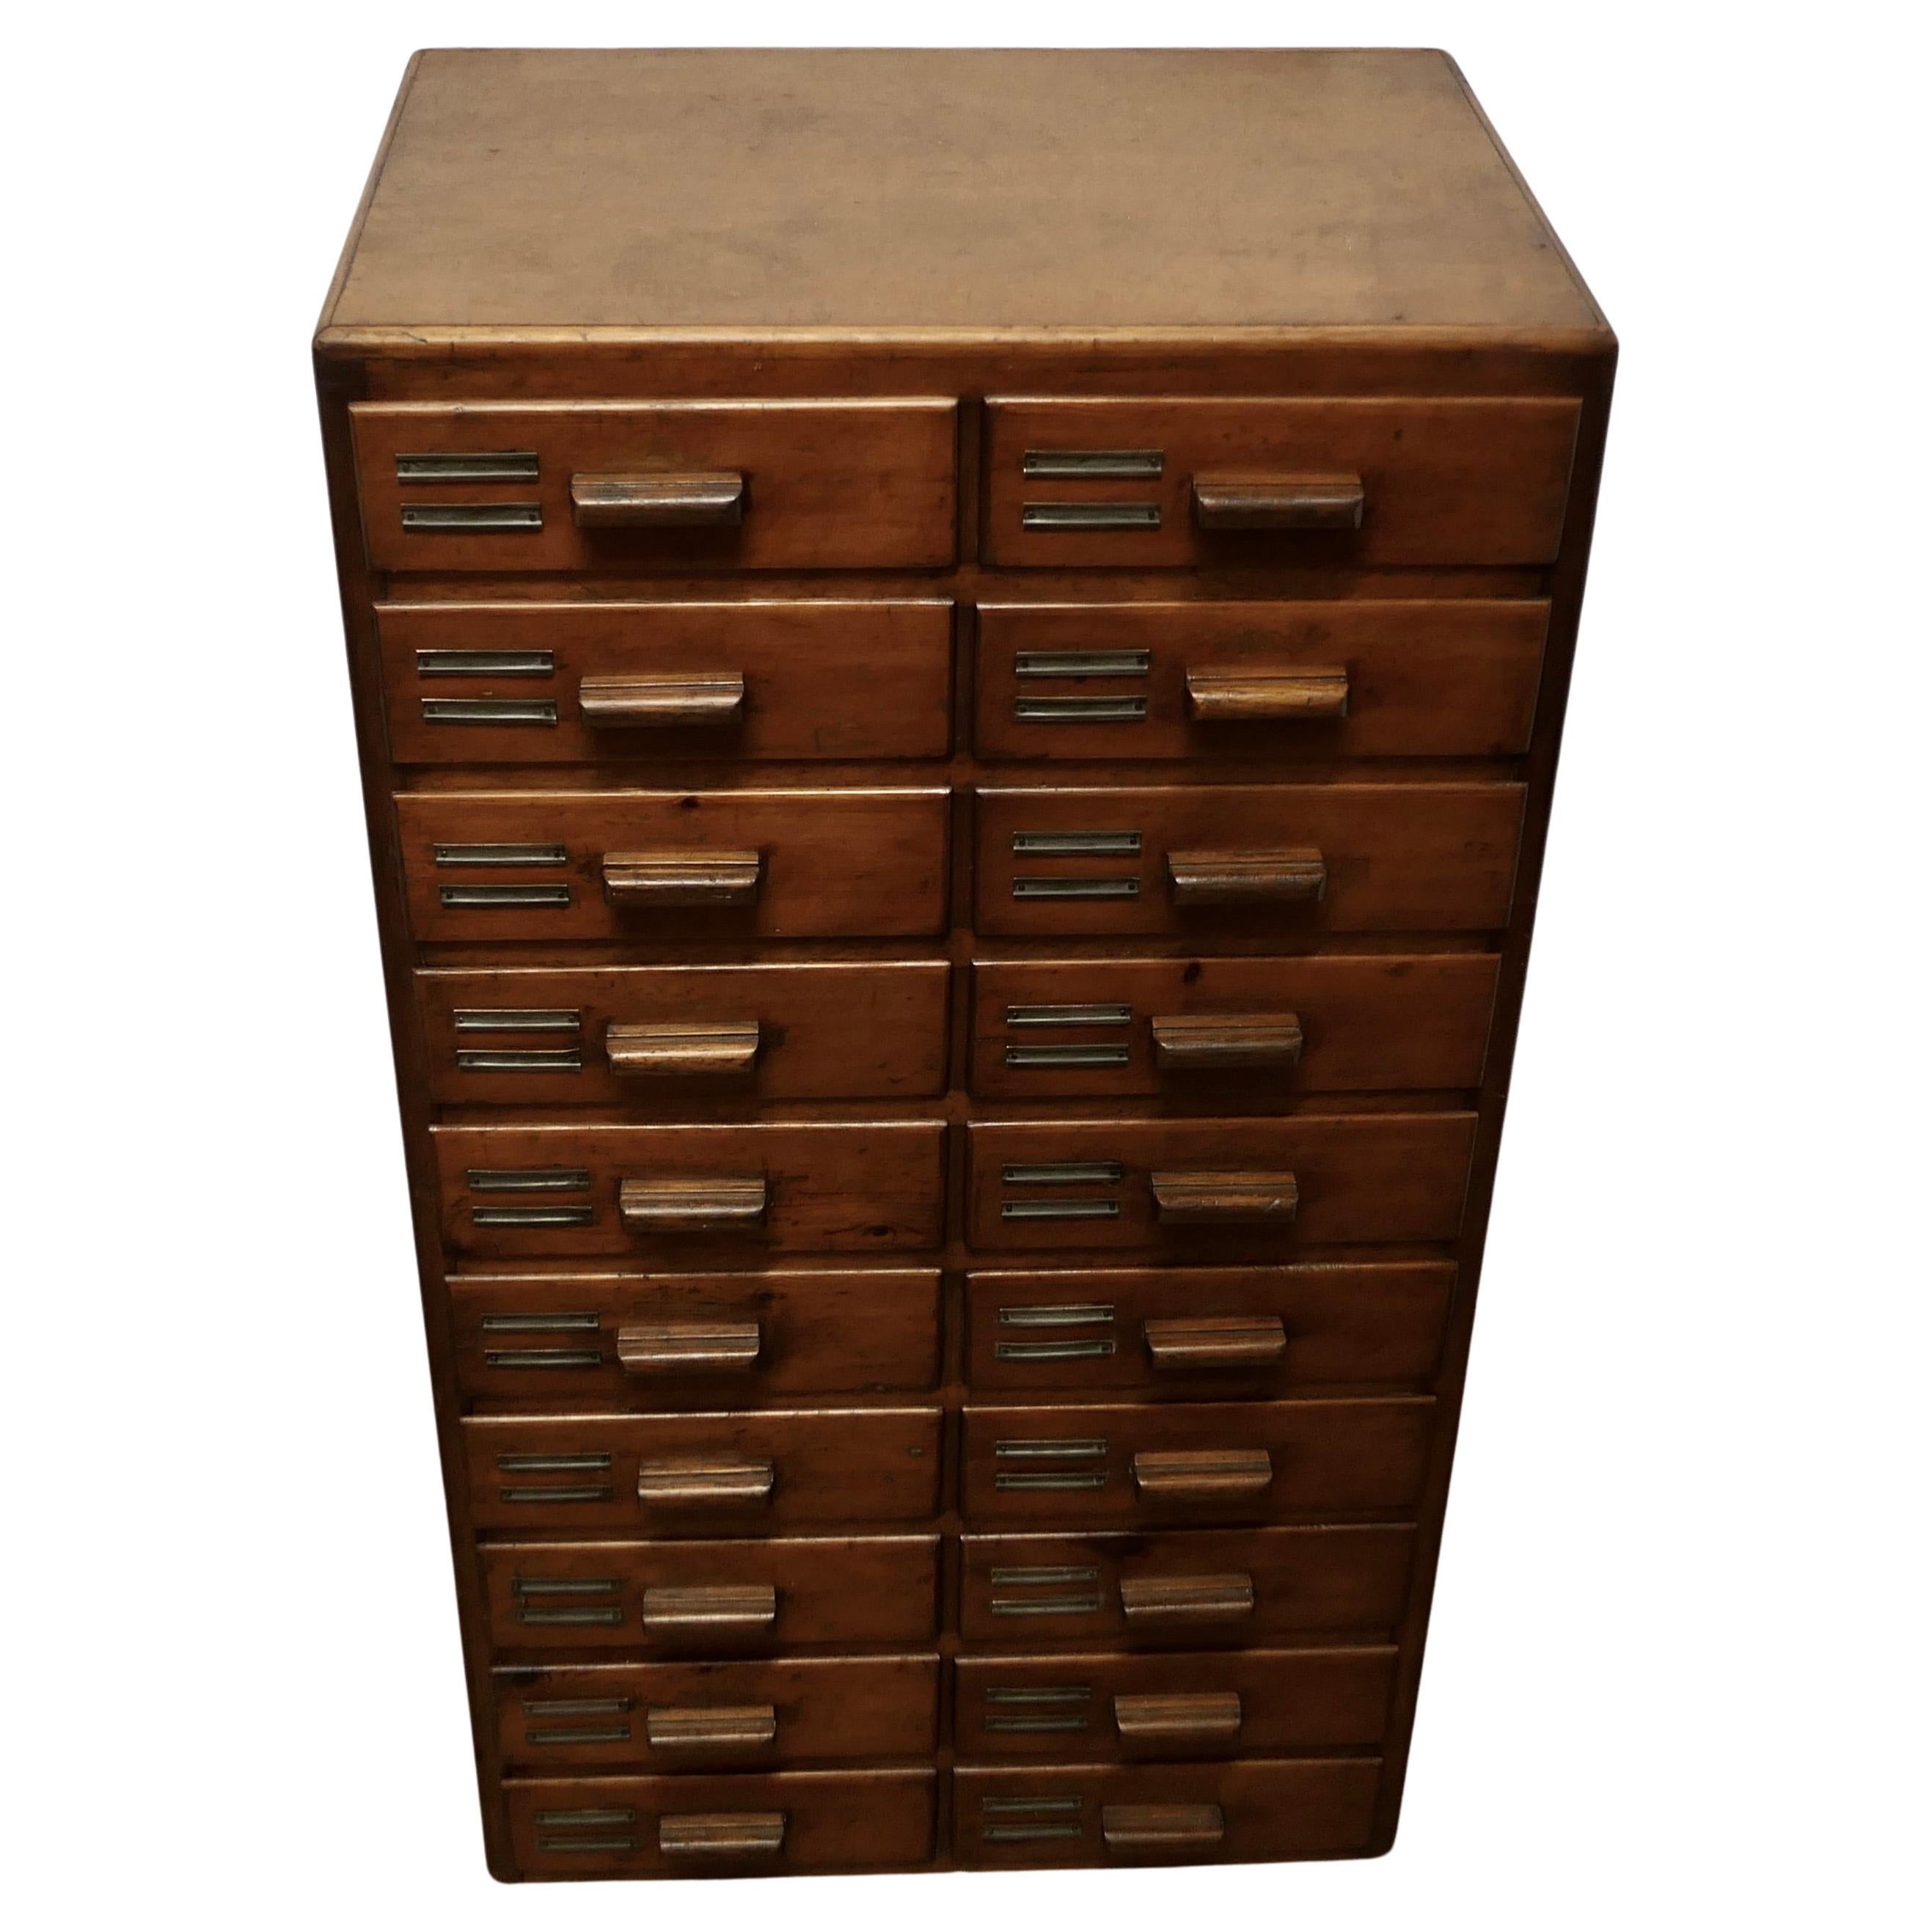 20 Drawer Art Deco A4 Filing Cabinet  This is a good sturdy cabinet 